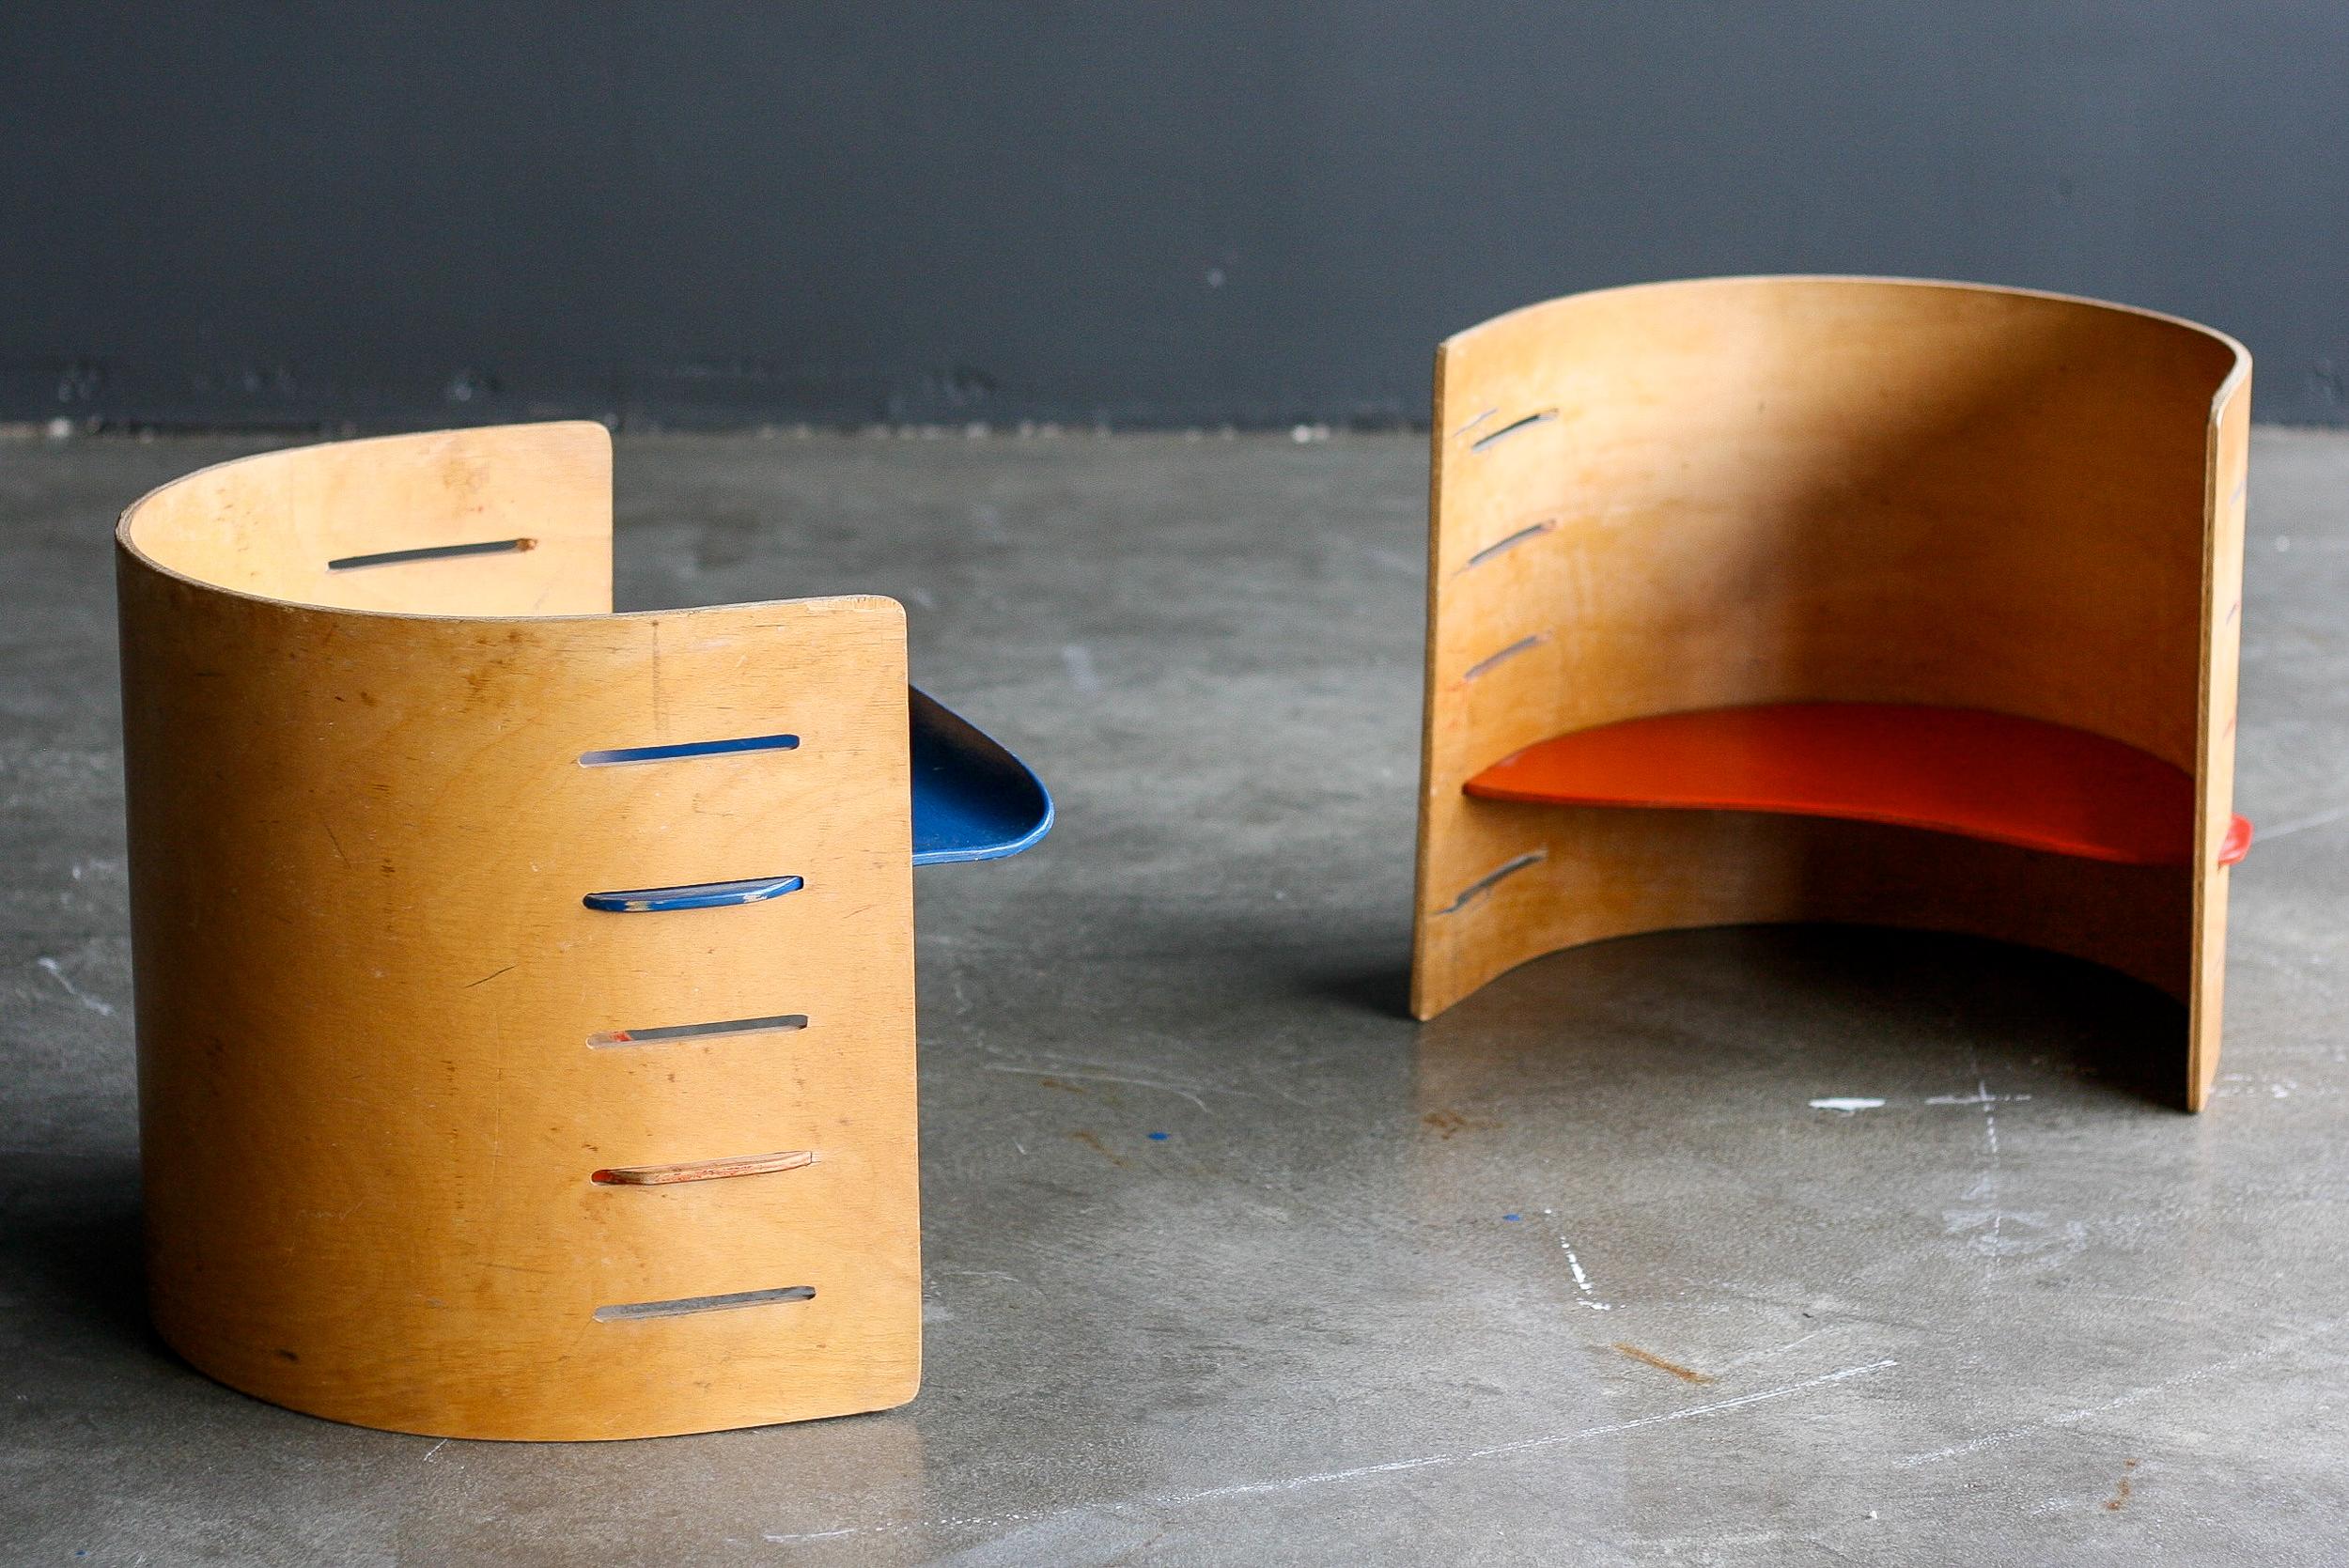 Danish Child's Chairs by Kristian Vedel for Torben Orskov, 1957